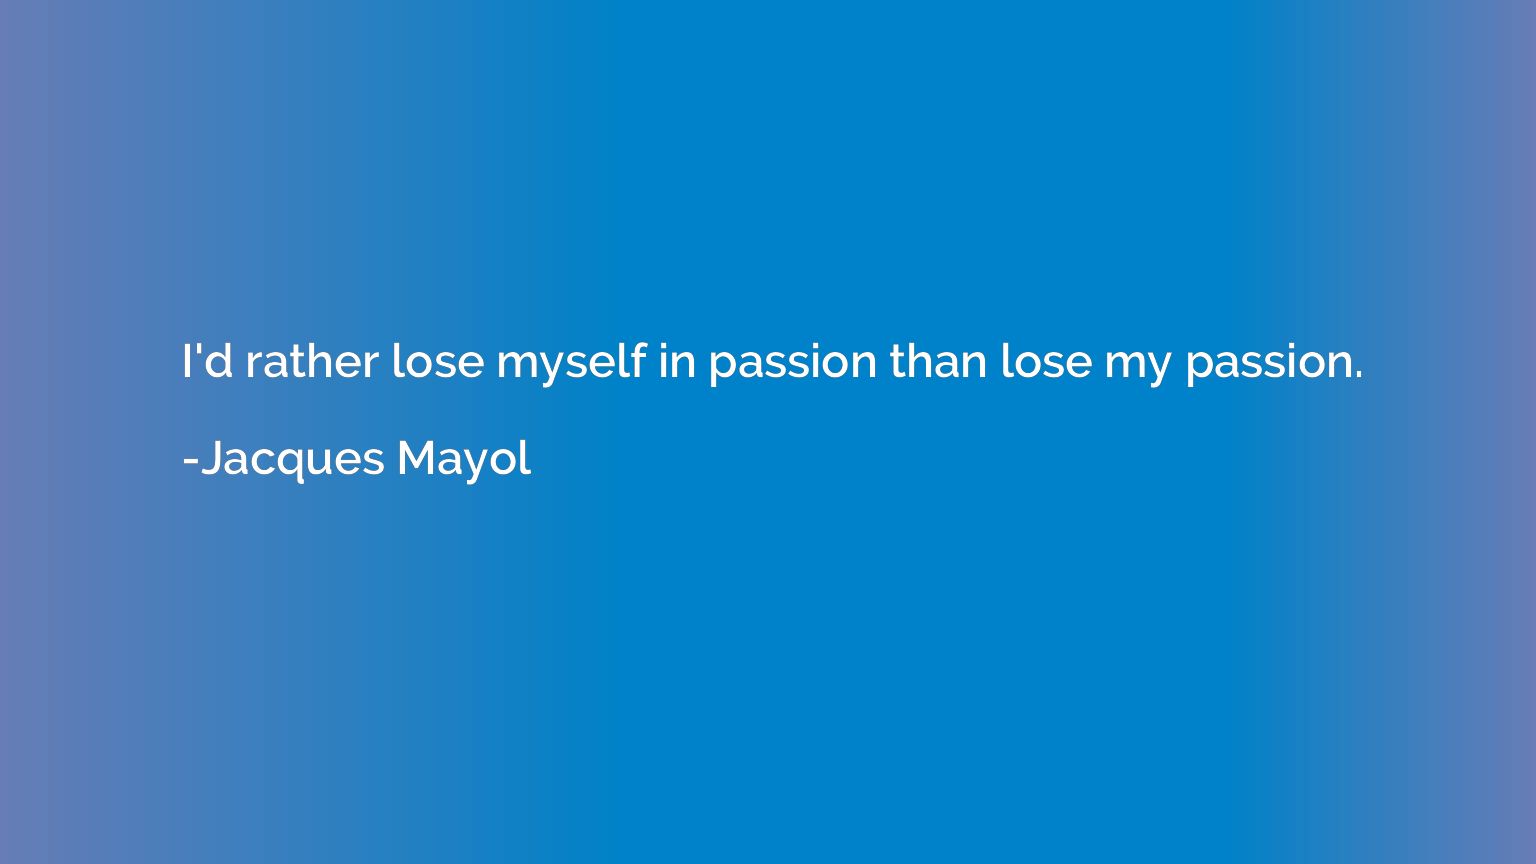 I'd rather lose myself in passion than lose my passion.